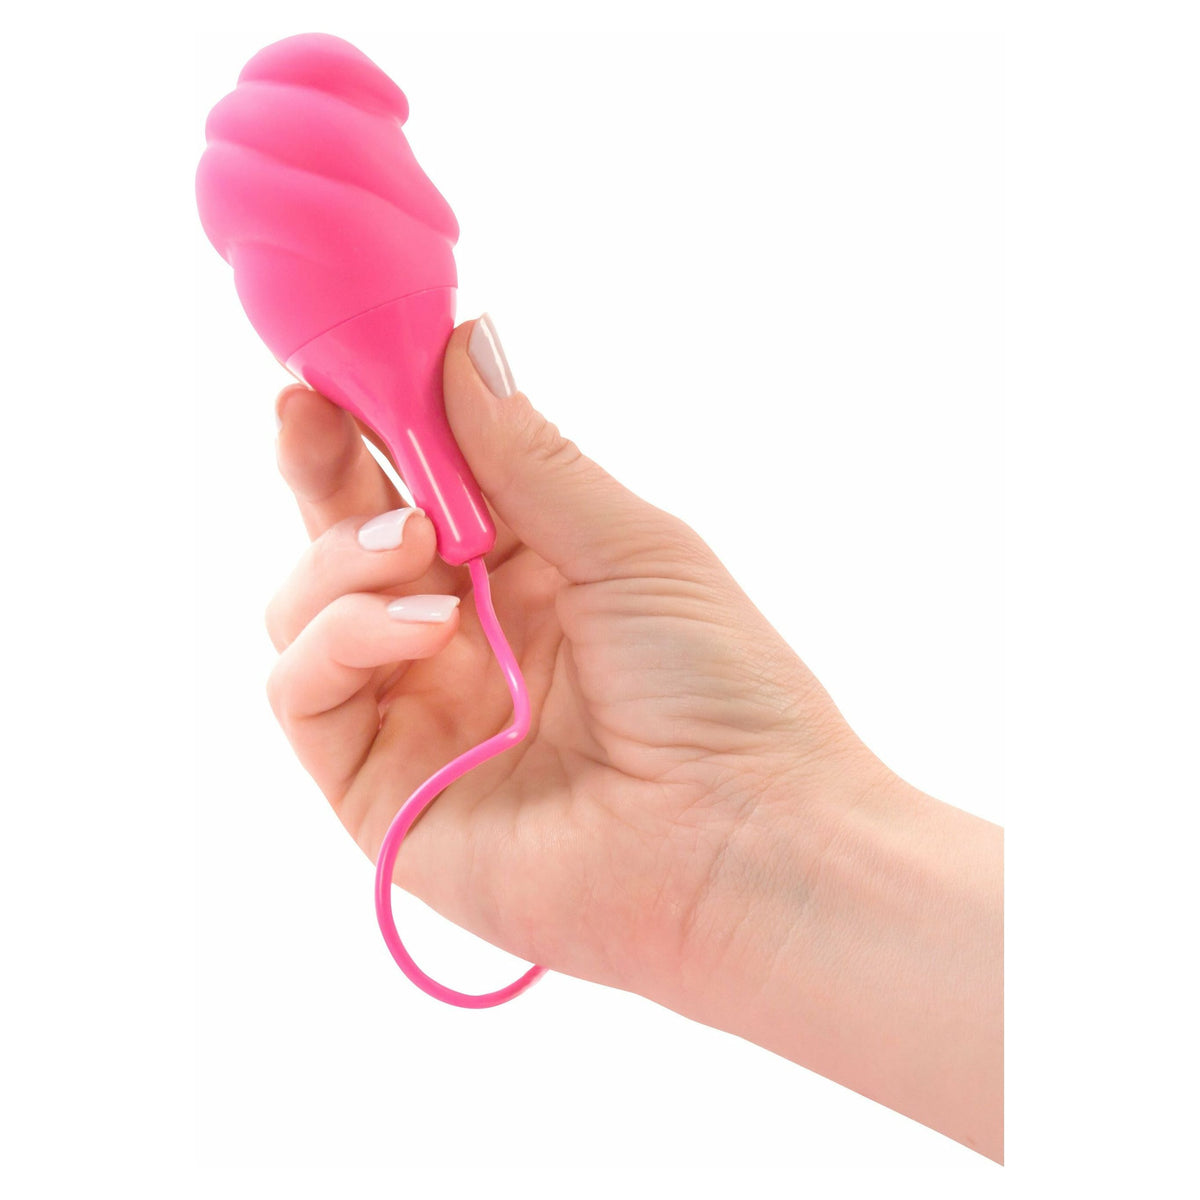 NMC Hands On - Textured Vibrator - Rechargeable - Pink